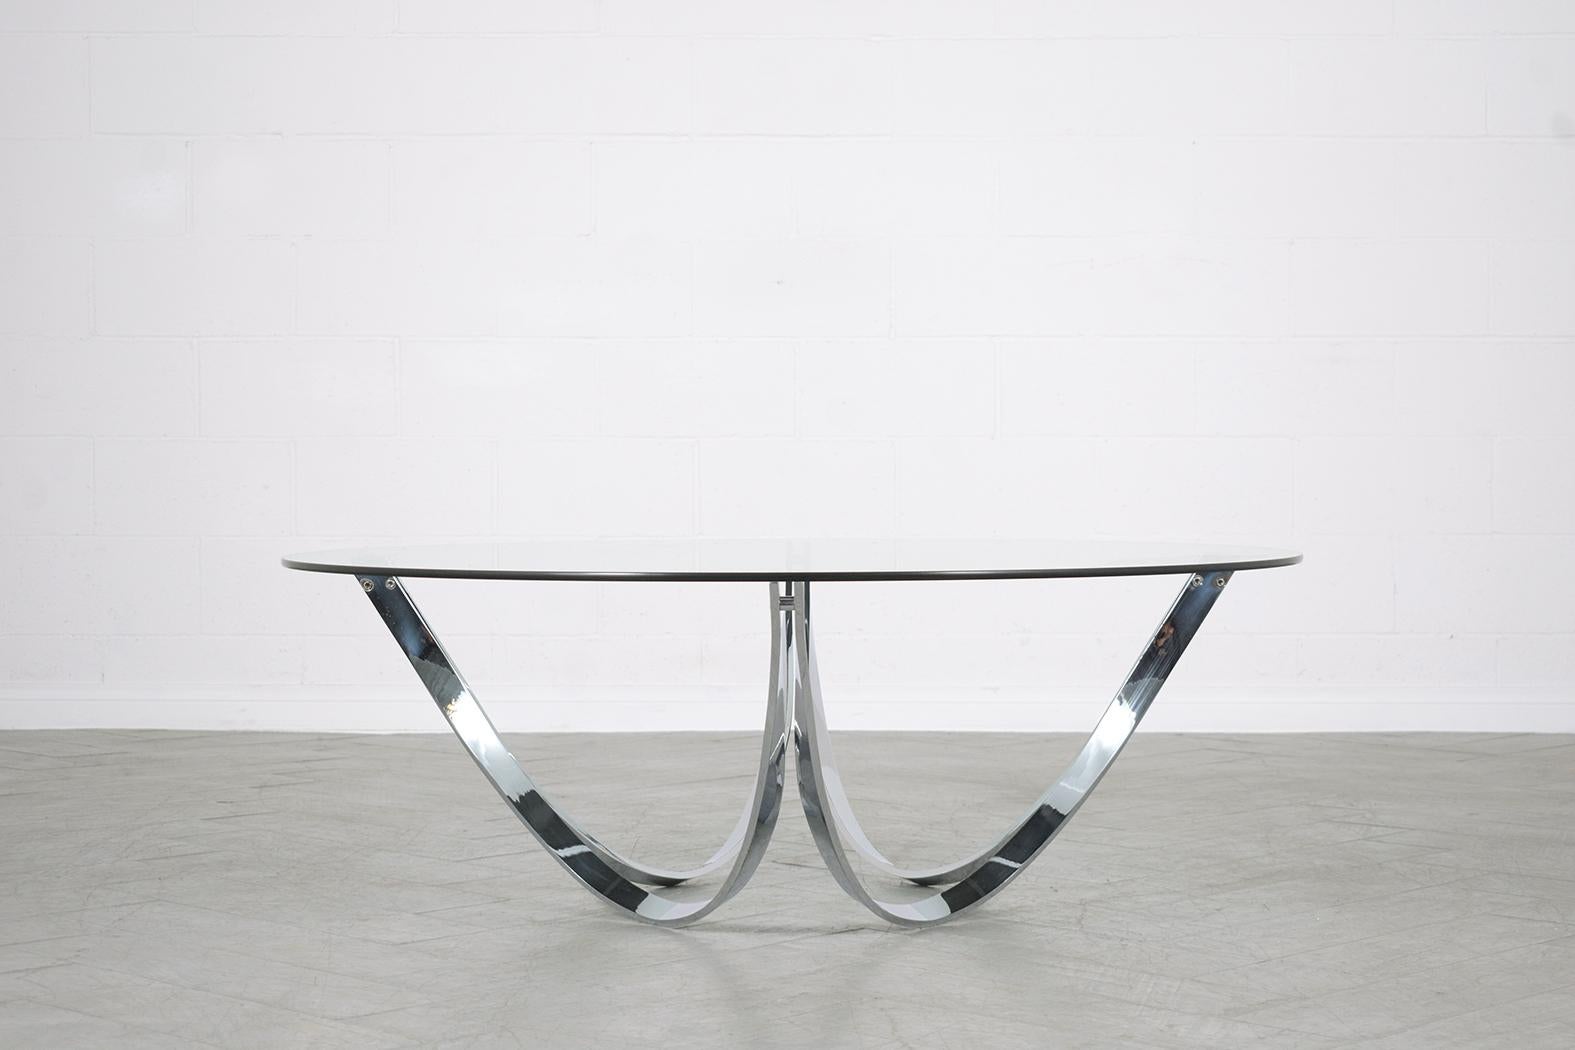 Hand-Crafted 1960s Mid-Century Modern Coffee Table: A Fusion of Steel and Glass